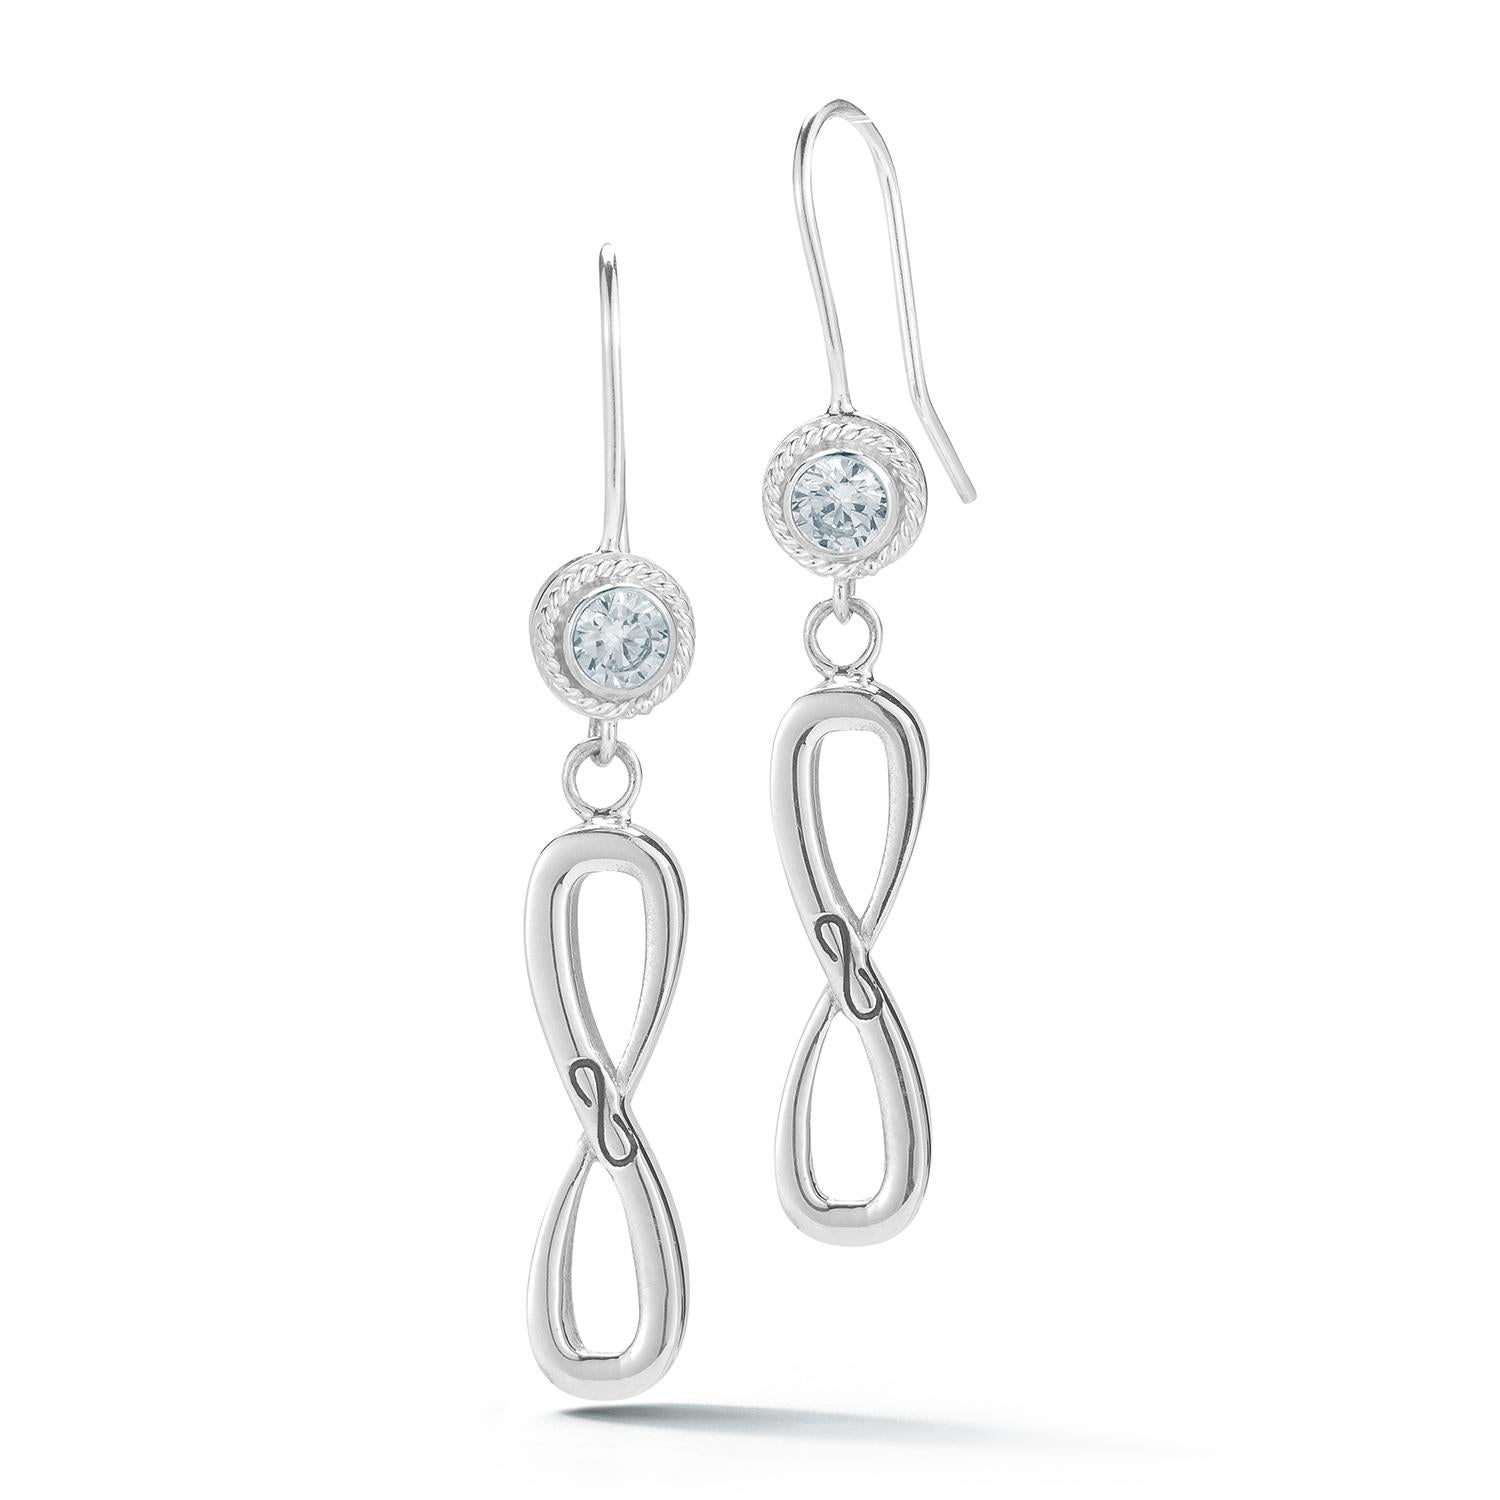 Designed in NYC

.925 Sterling Silver 2 x 7 mm White Topaz Infinity Stone Stud Wire Hook Earrings. When it comes to self-expression, the style possibilities are endless. Infinity stone stud wire hook earrings:

Sterling silver 
High-polish